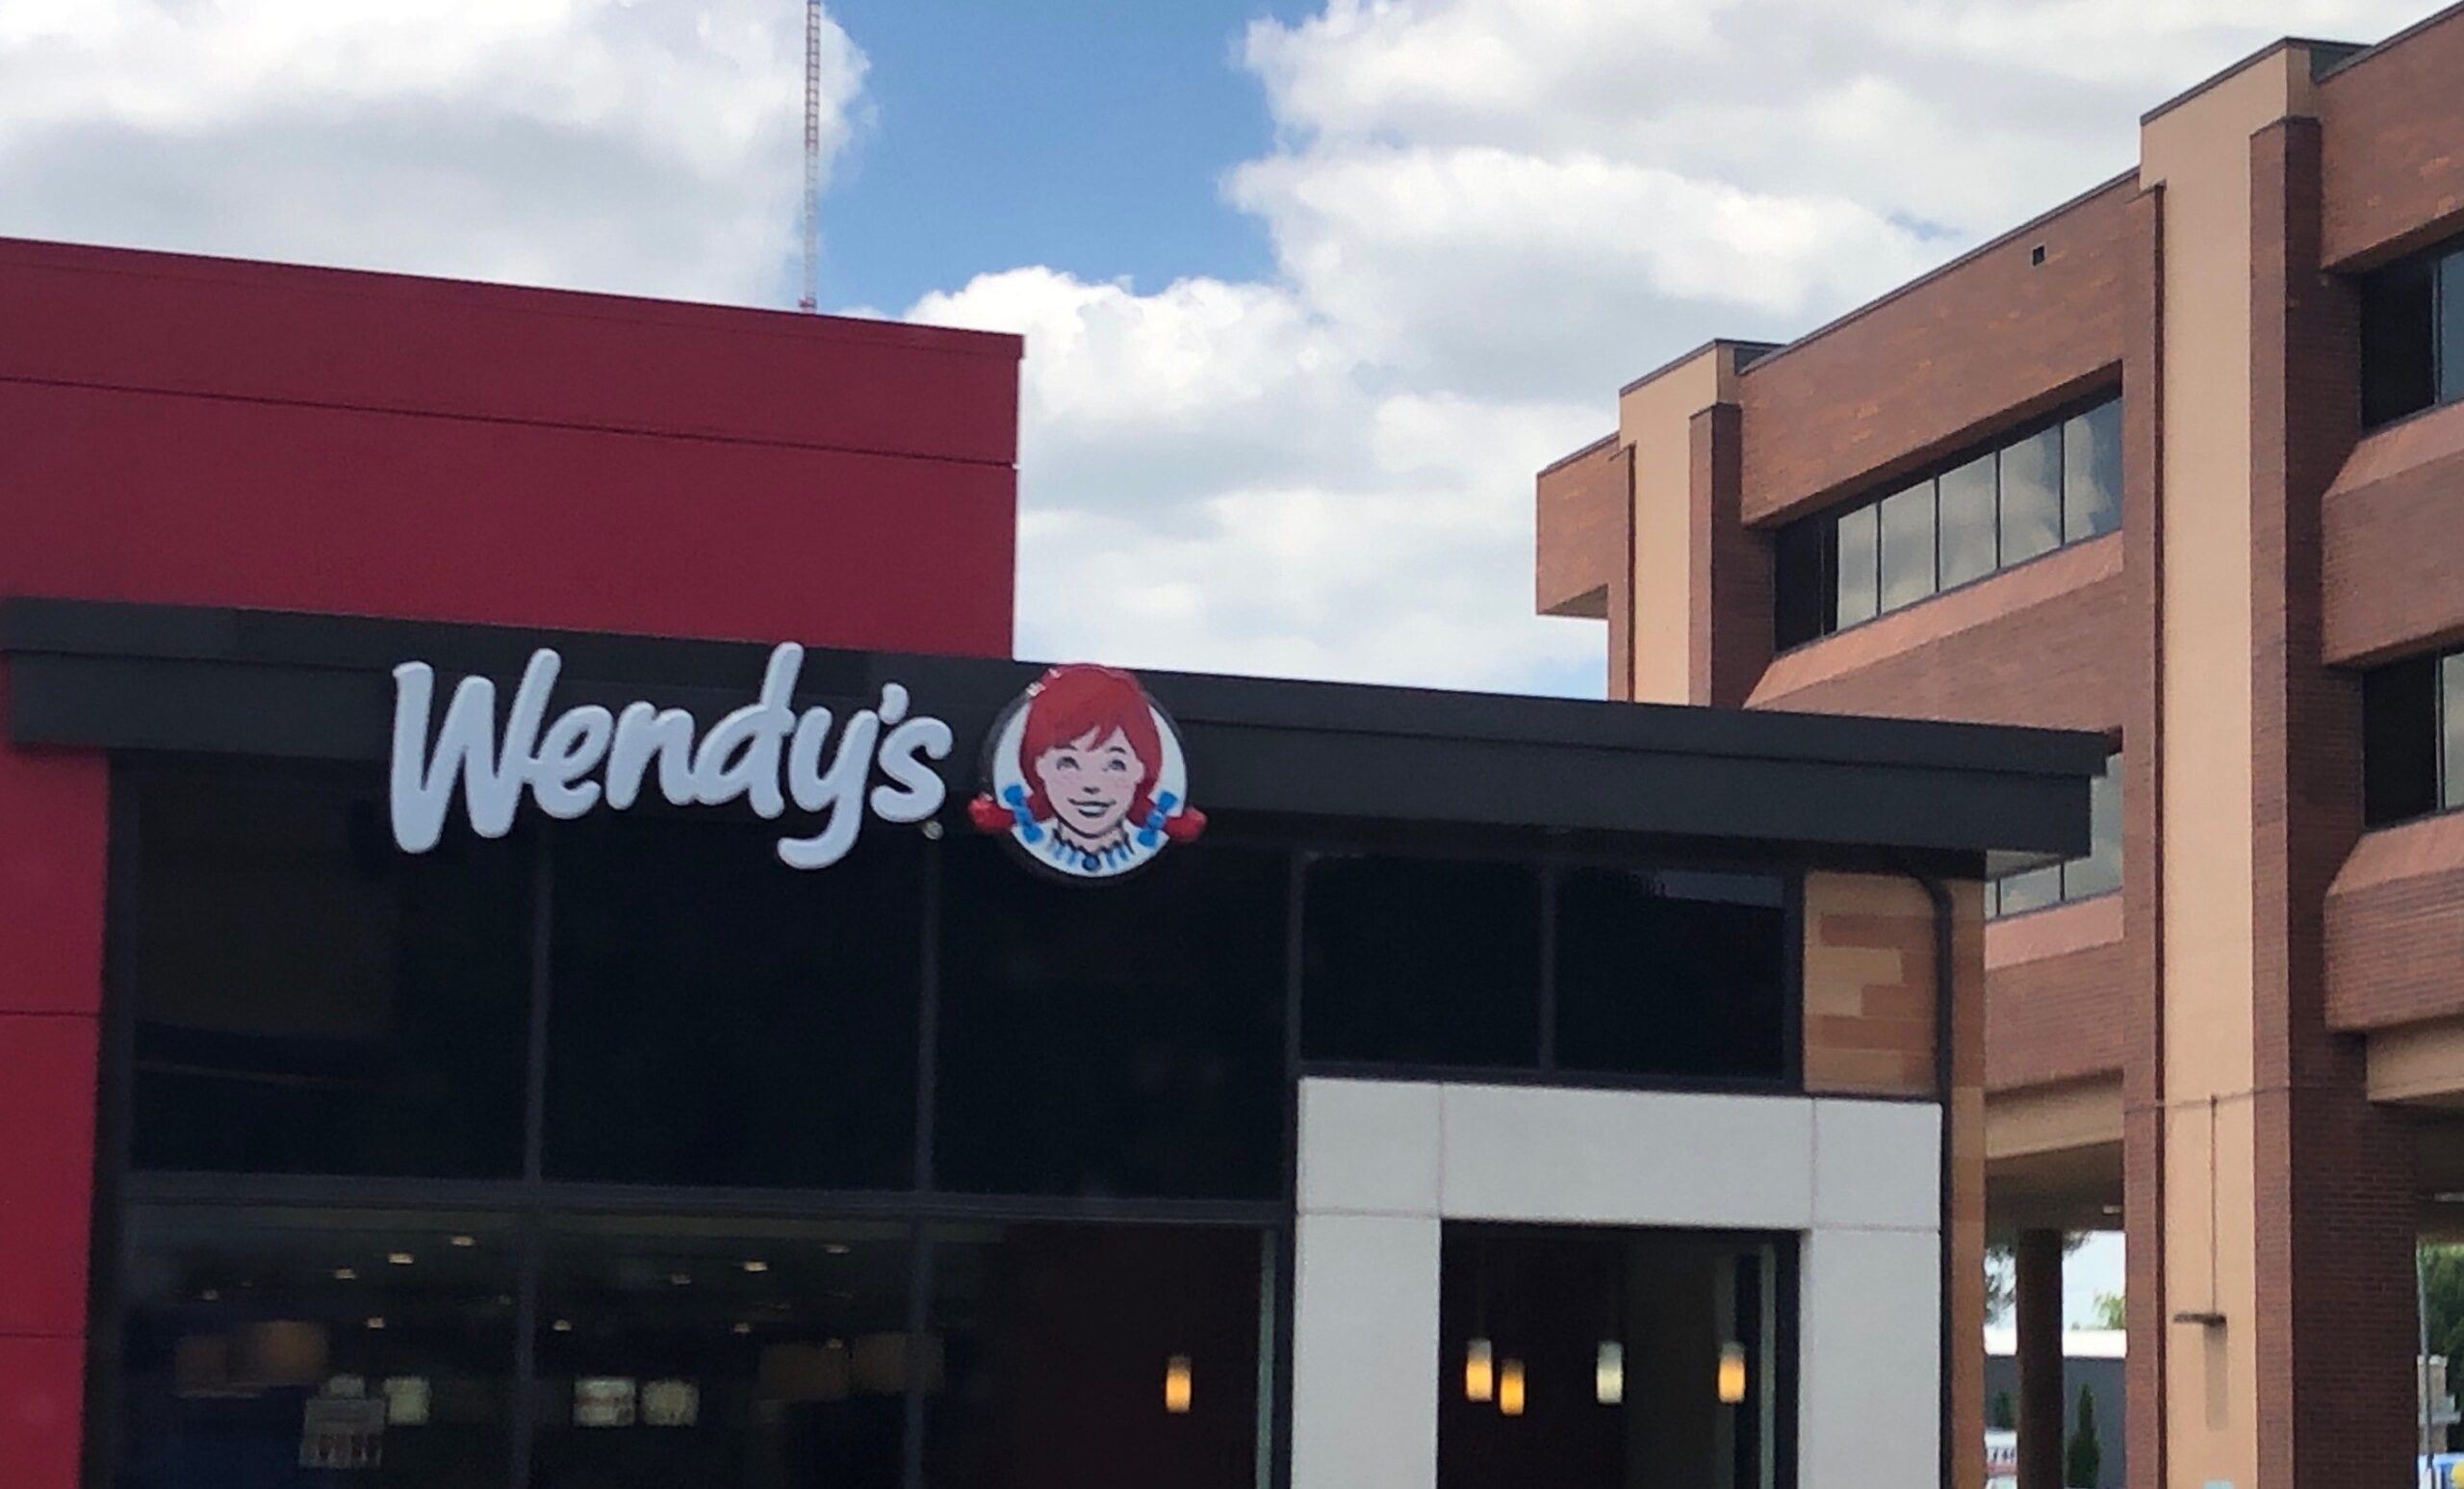 A Wendy's restaurant in front of a building, serving Weight Watchers options.